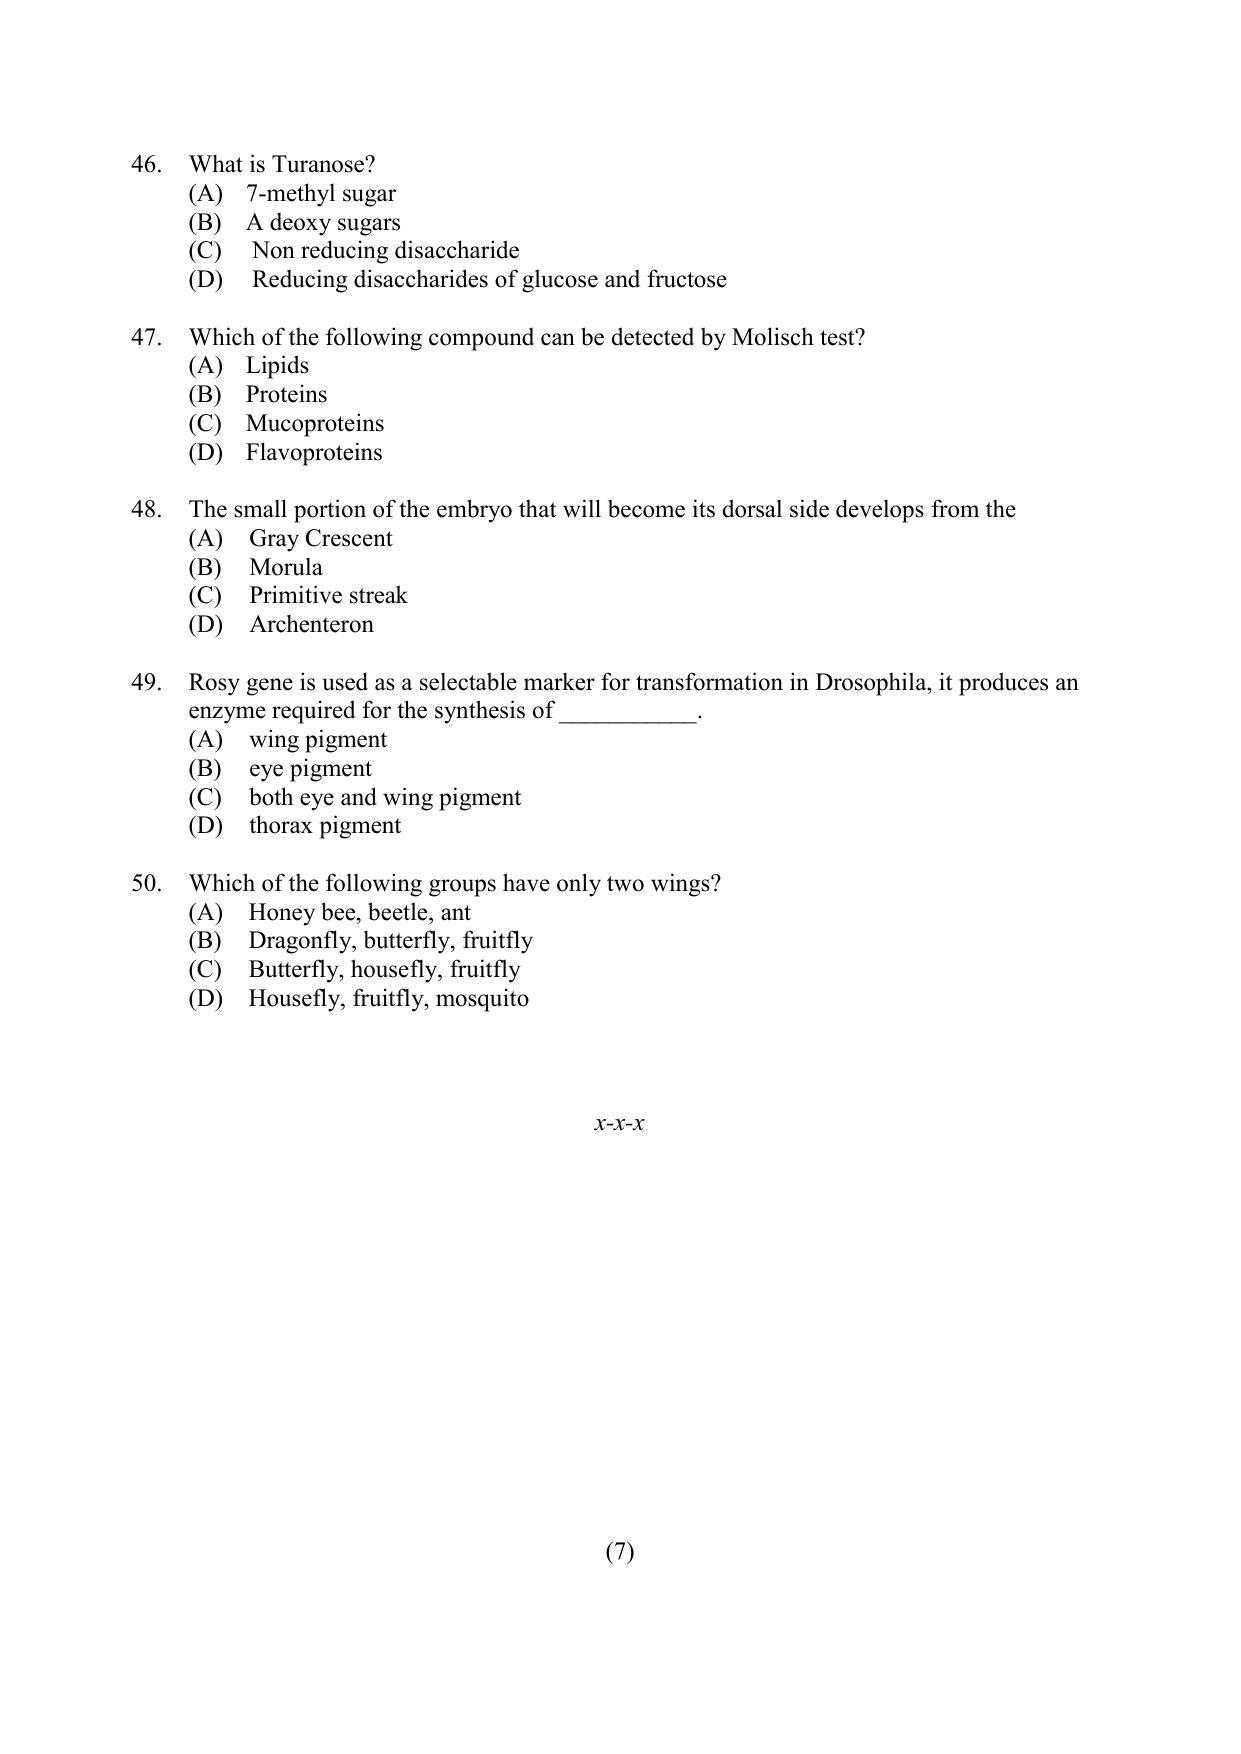 PU MPET Anthropology 2022 Question Papers - Page 86